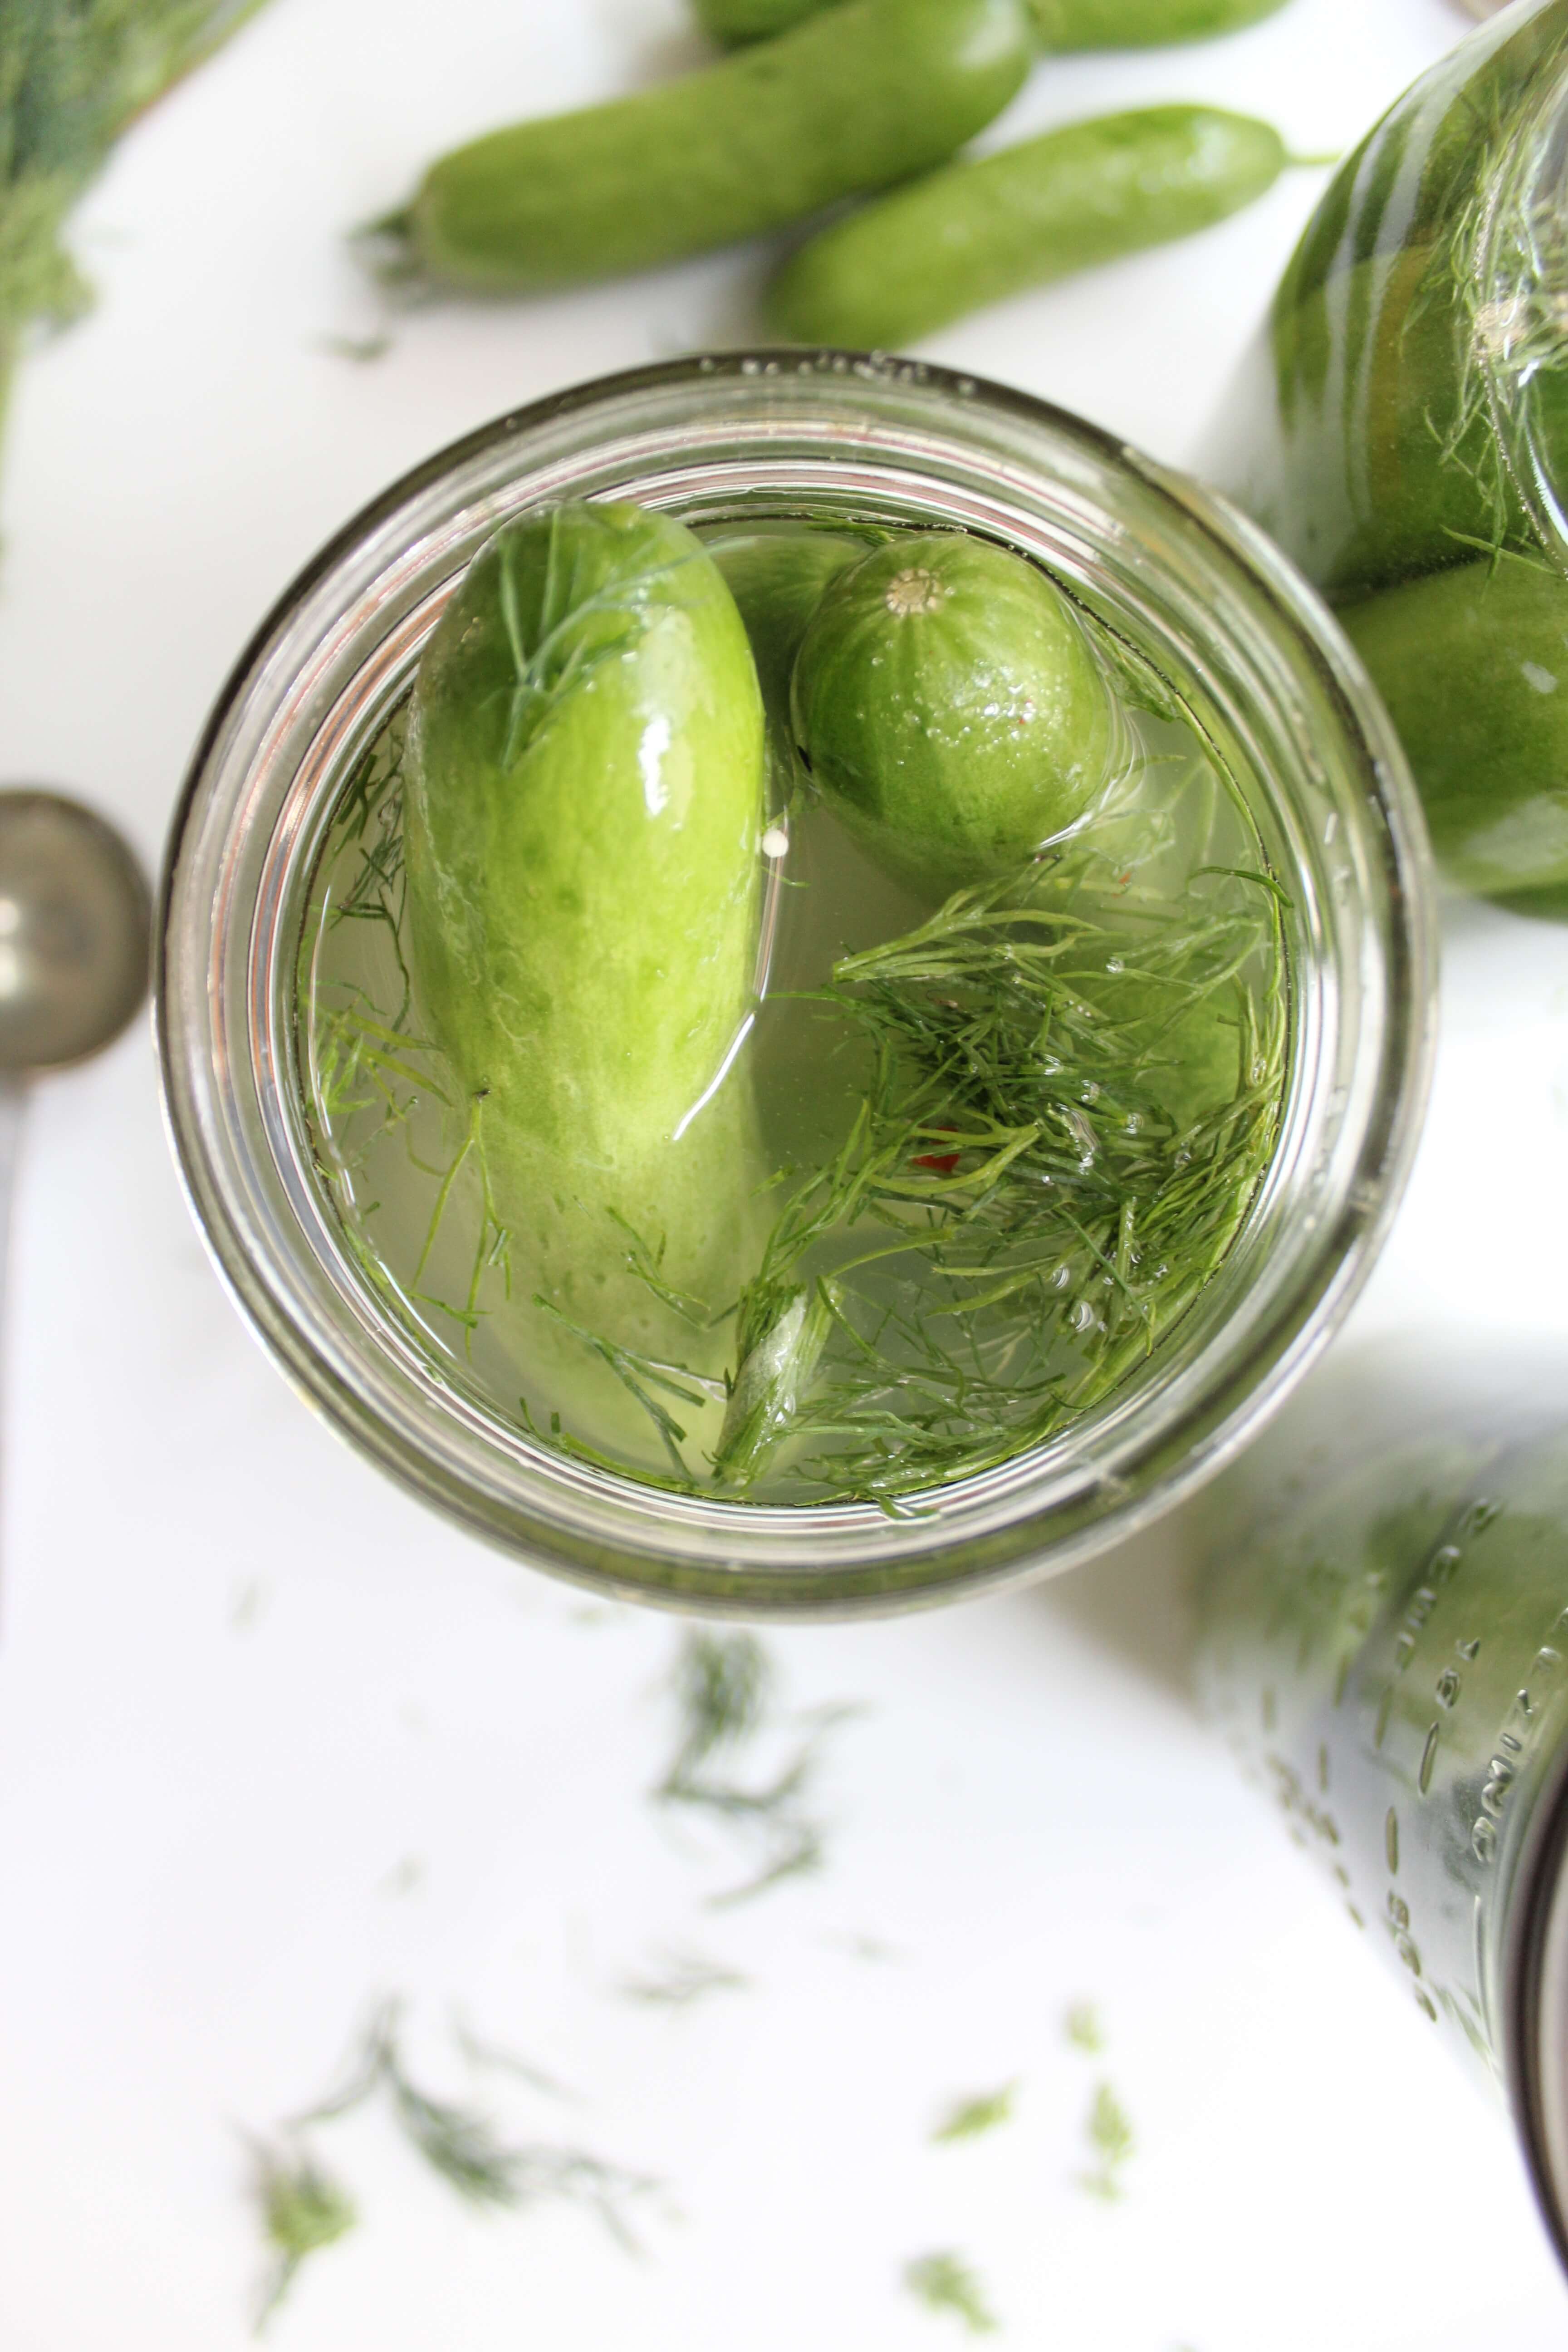 Perfect Lactofermented Dill Pickles (that work every time!)